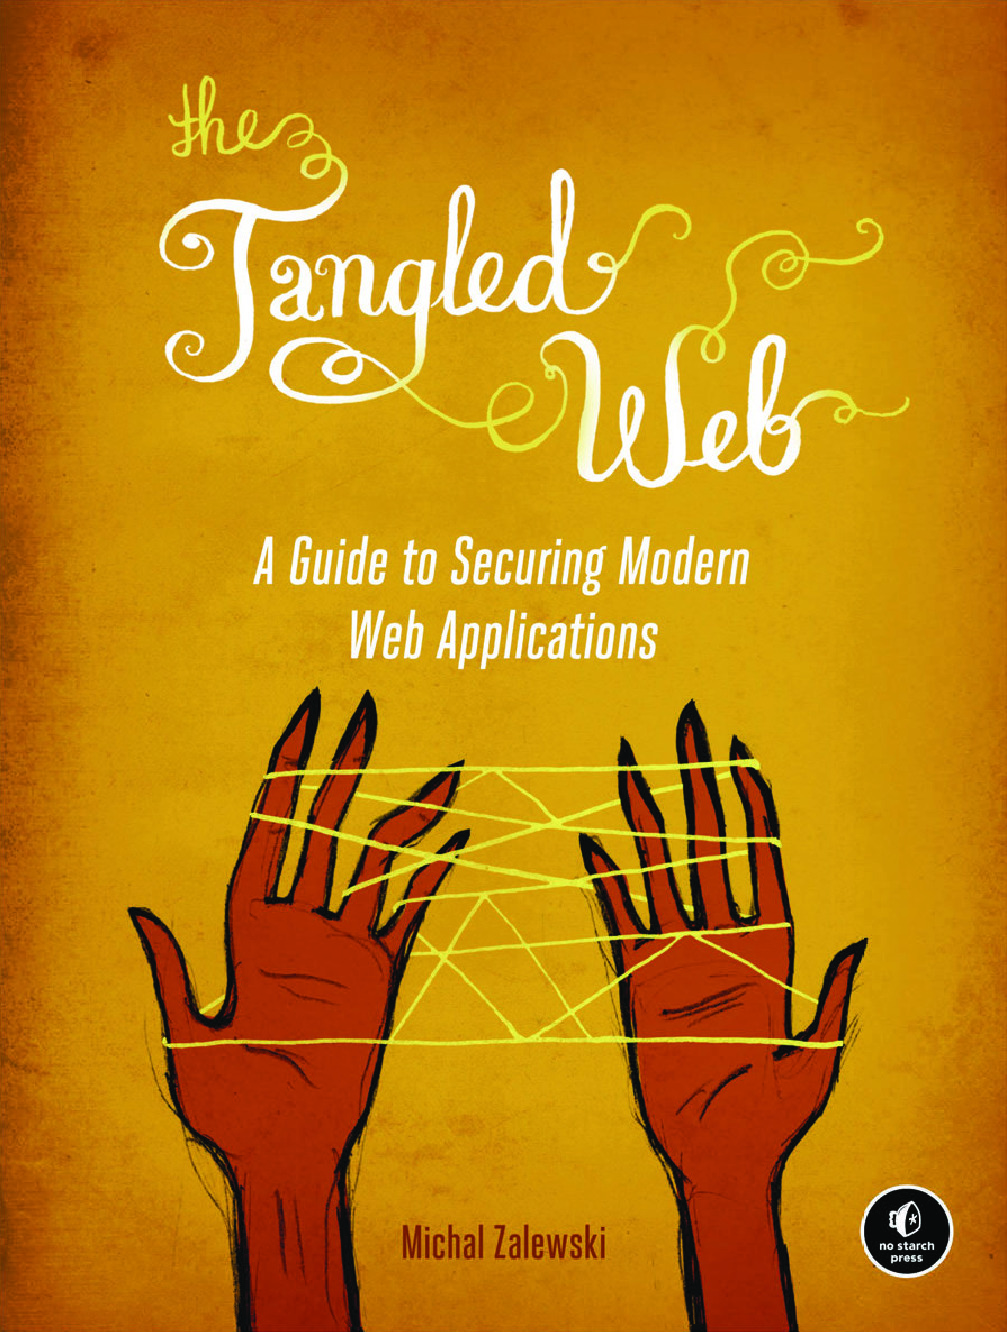 The+Tagled+Web+A+Guide+to+Securing+Modern+Web+Applications